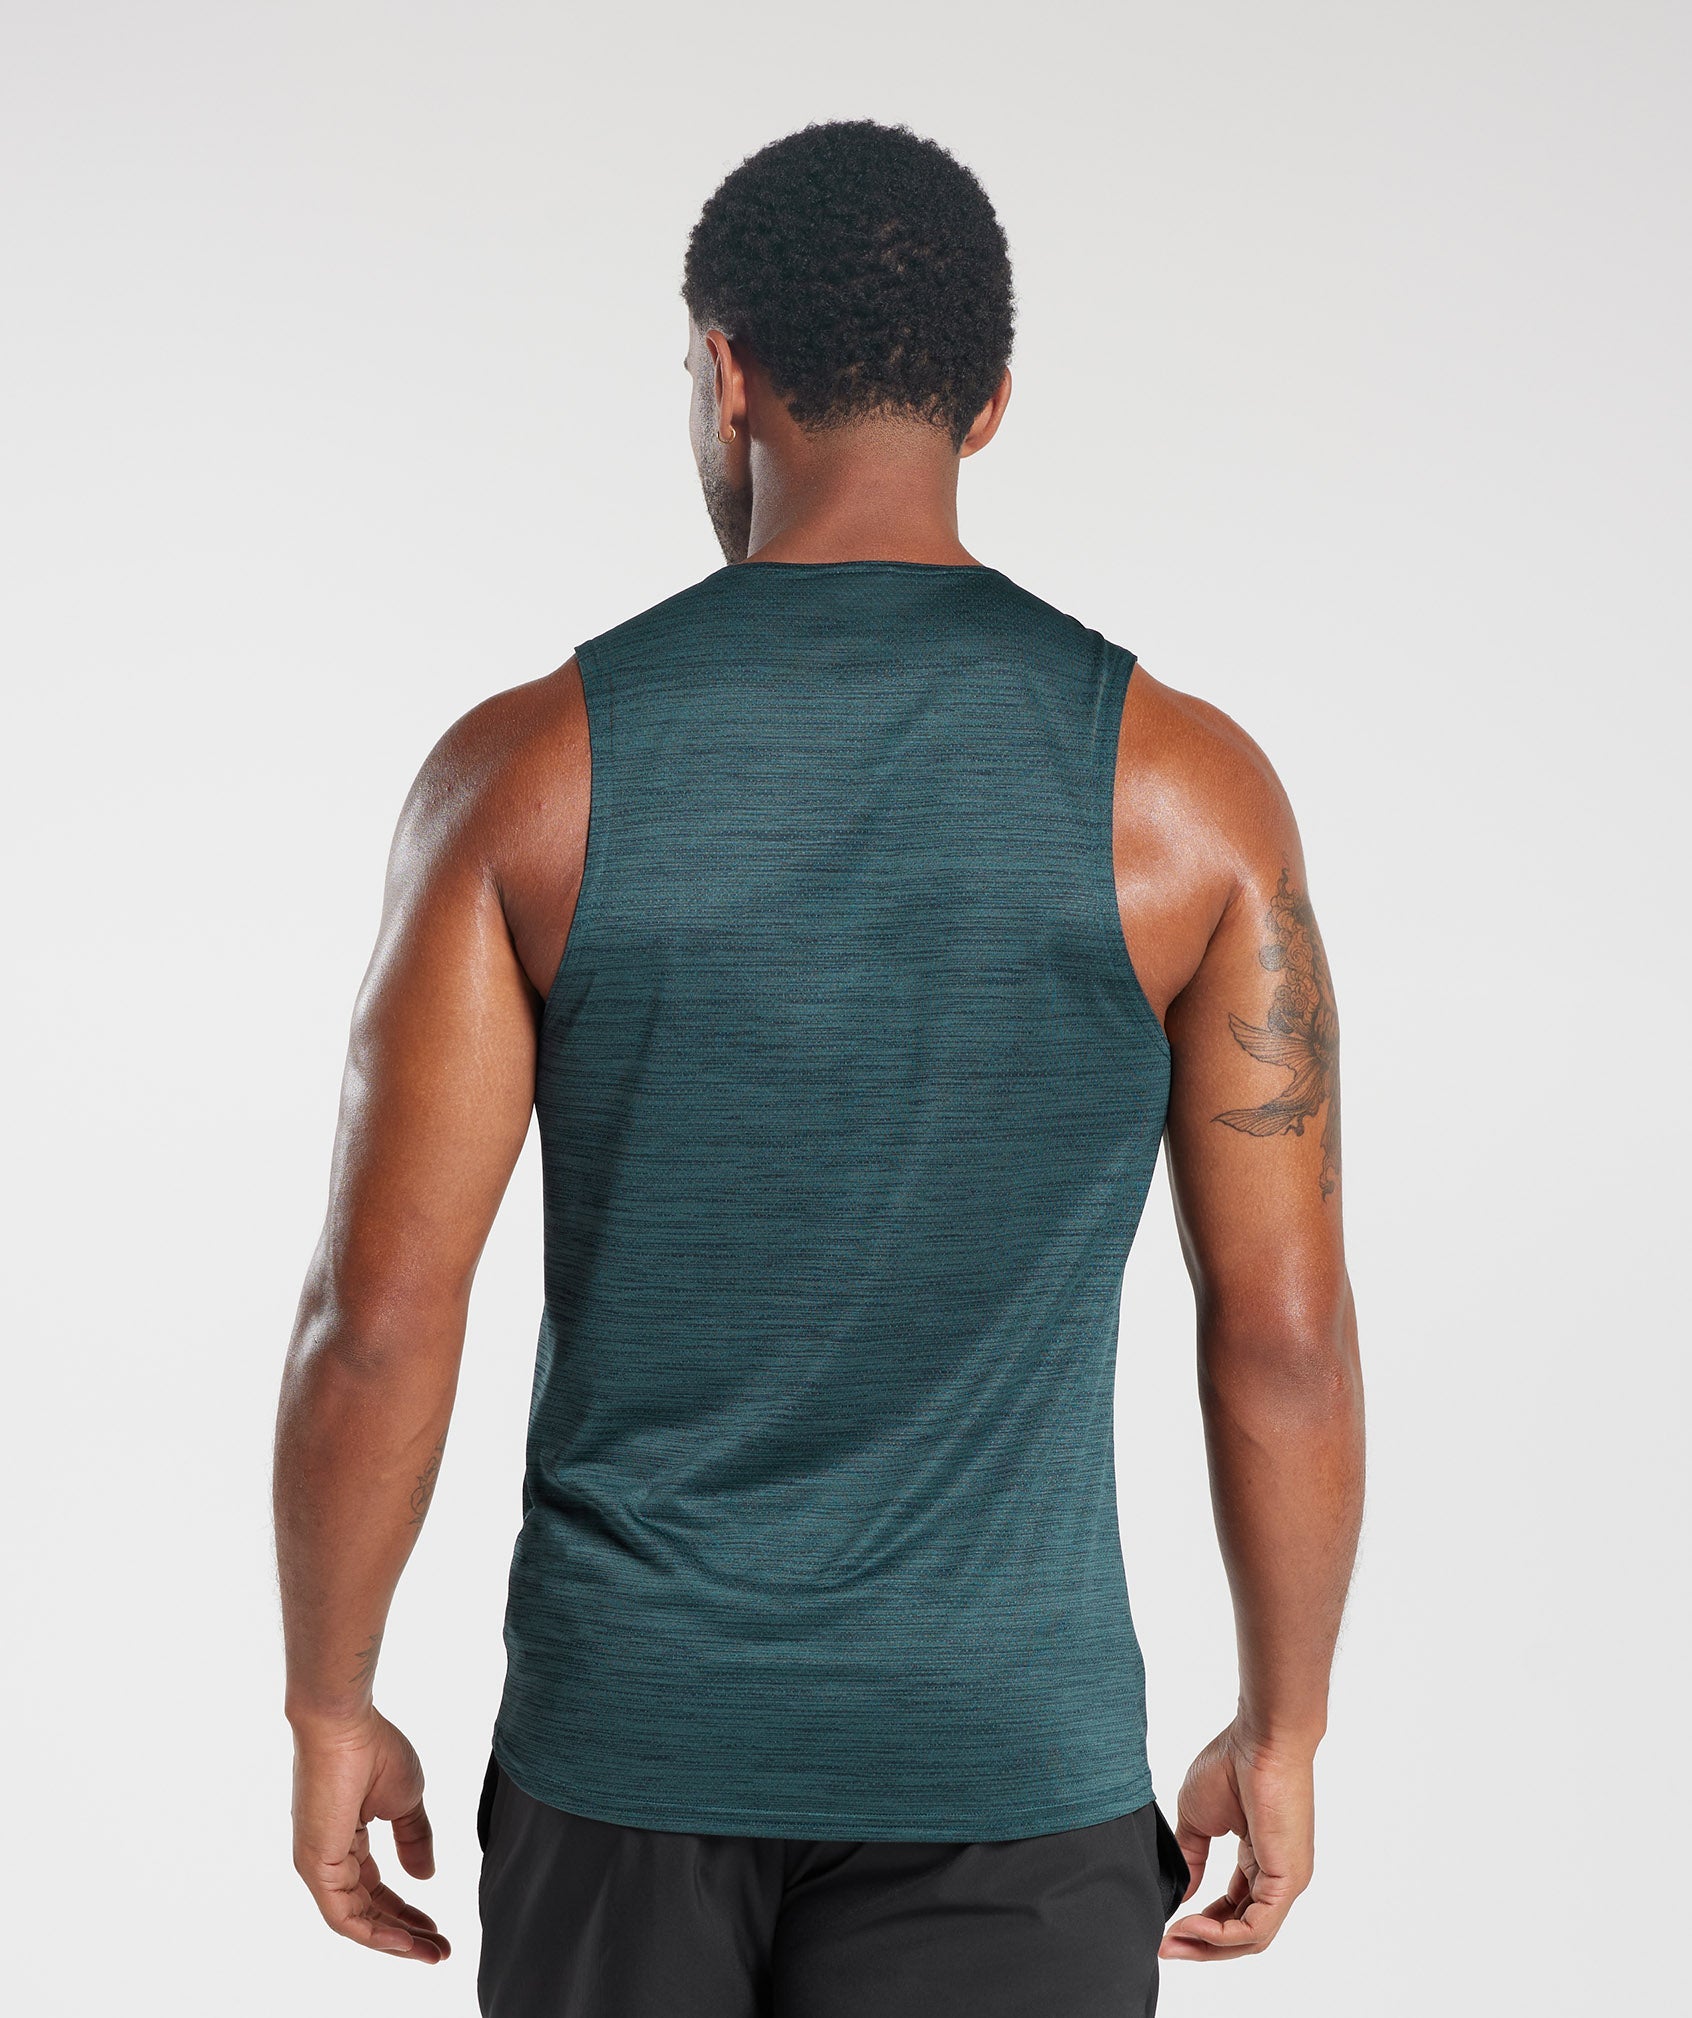 Arrival Marl Tank in Navy/Smokey Teal Marl - view 2